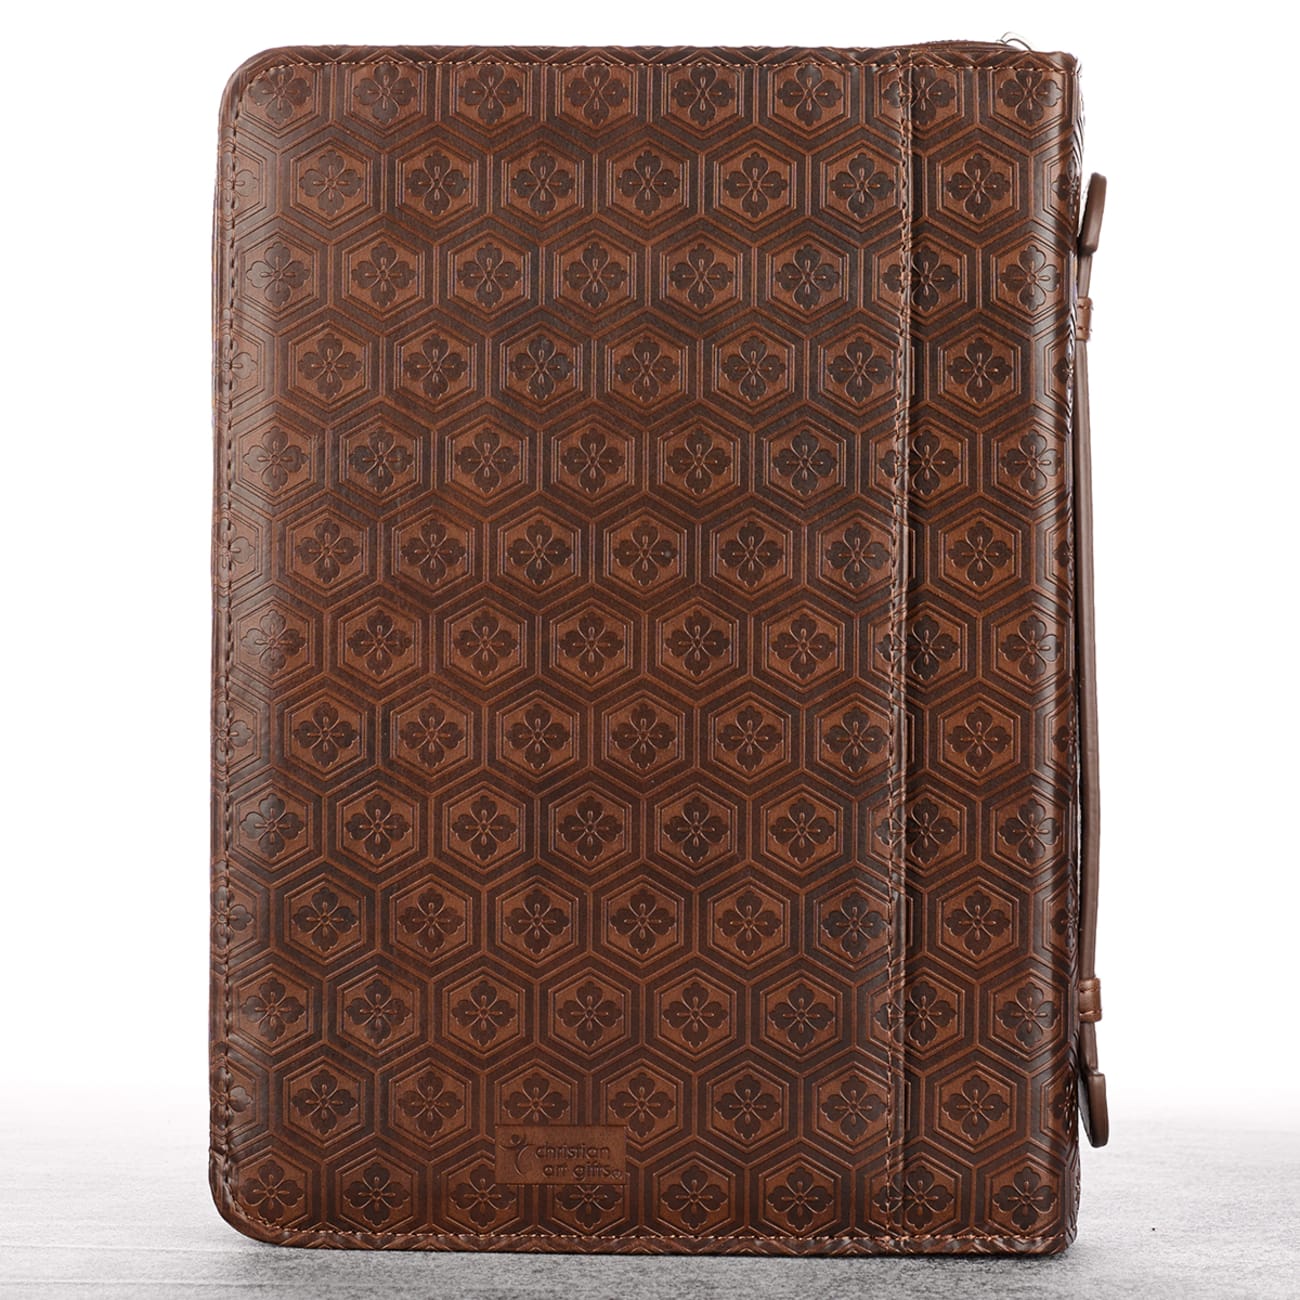 Bible Cover Classic Medium: Trust Prov 3:5, Brown Bible Cover